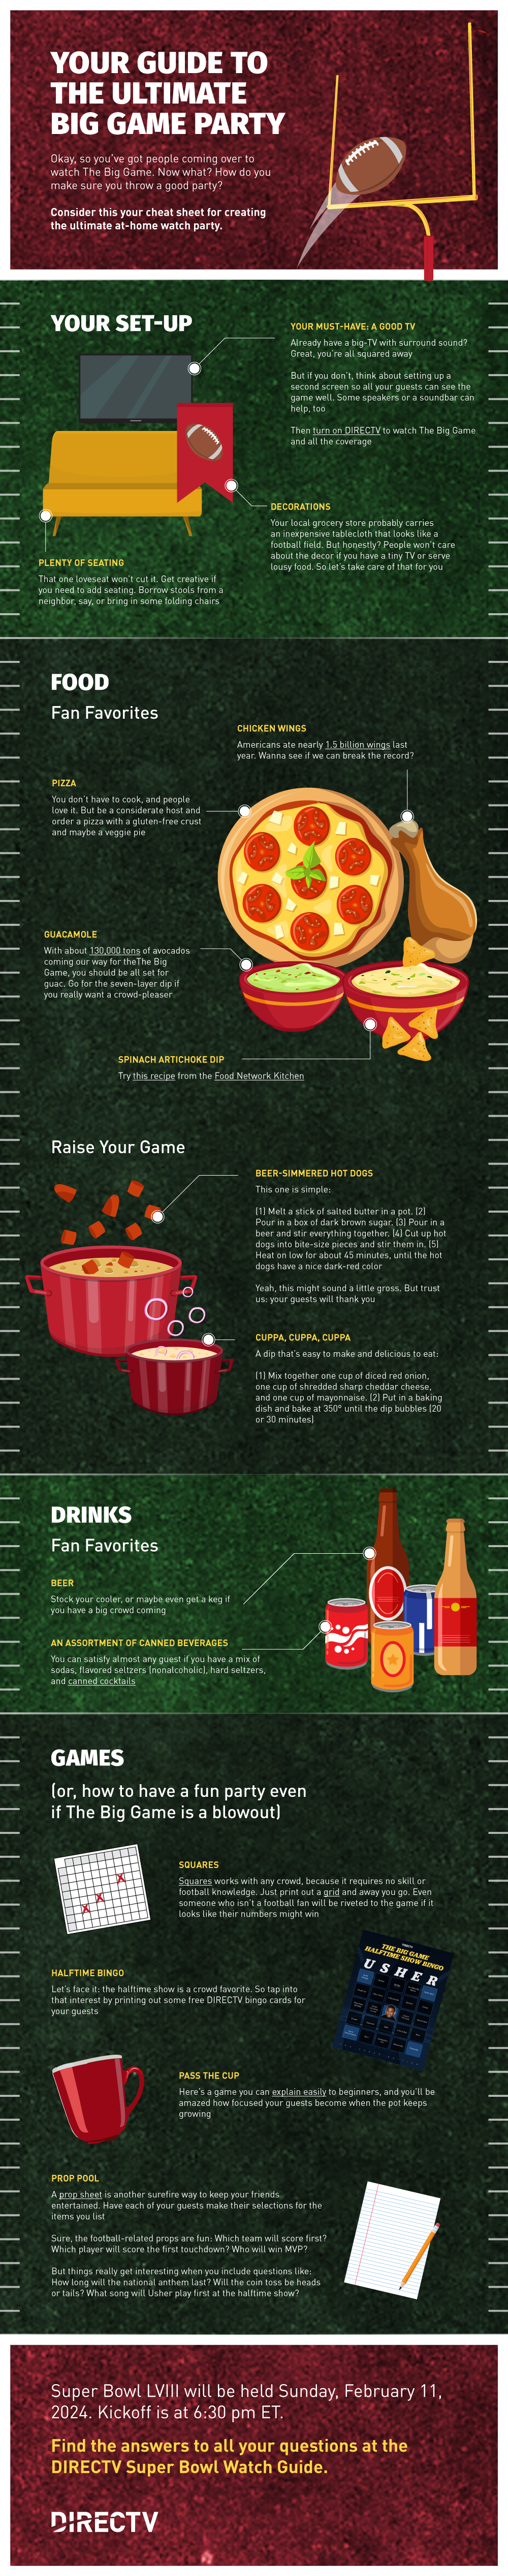 DirecTV_Infographic_Super-Bowl-Party_020624.png